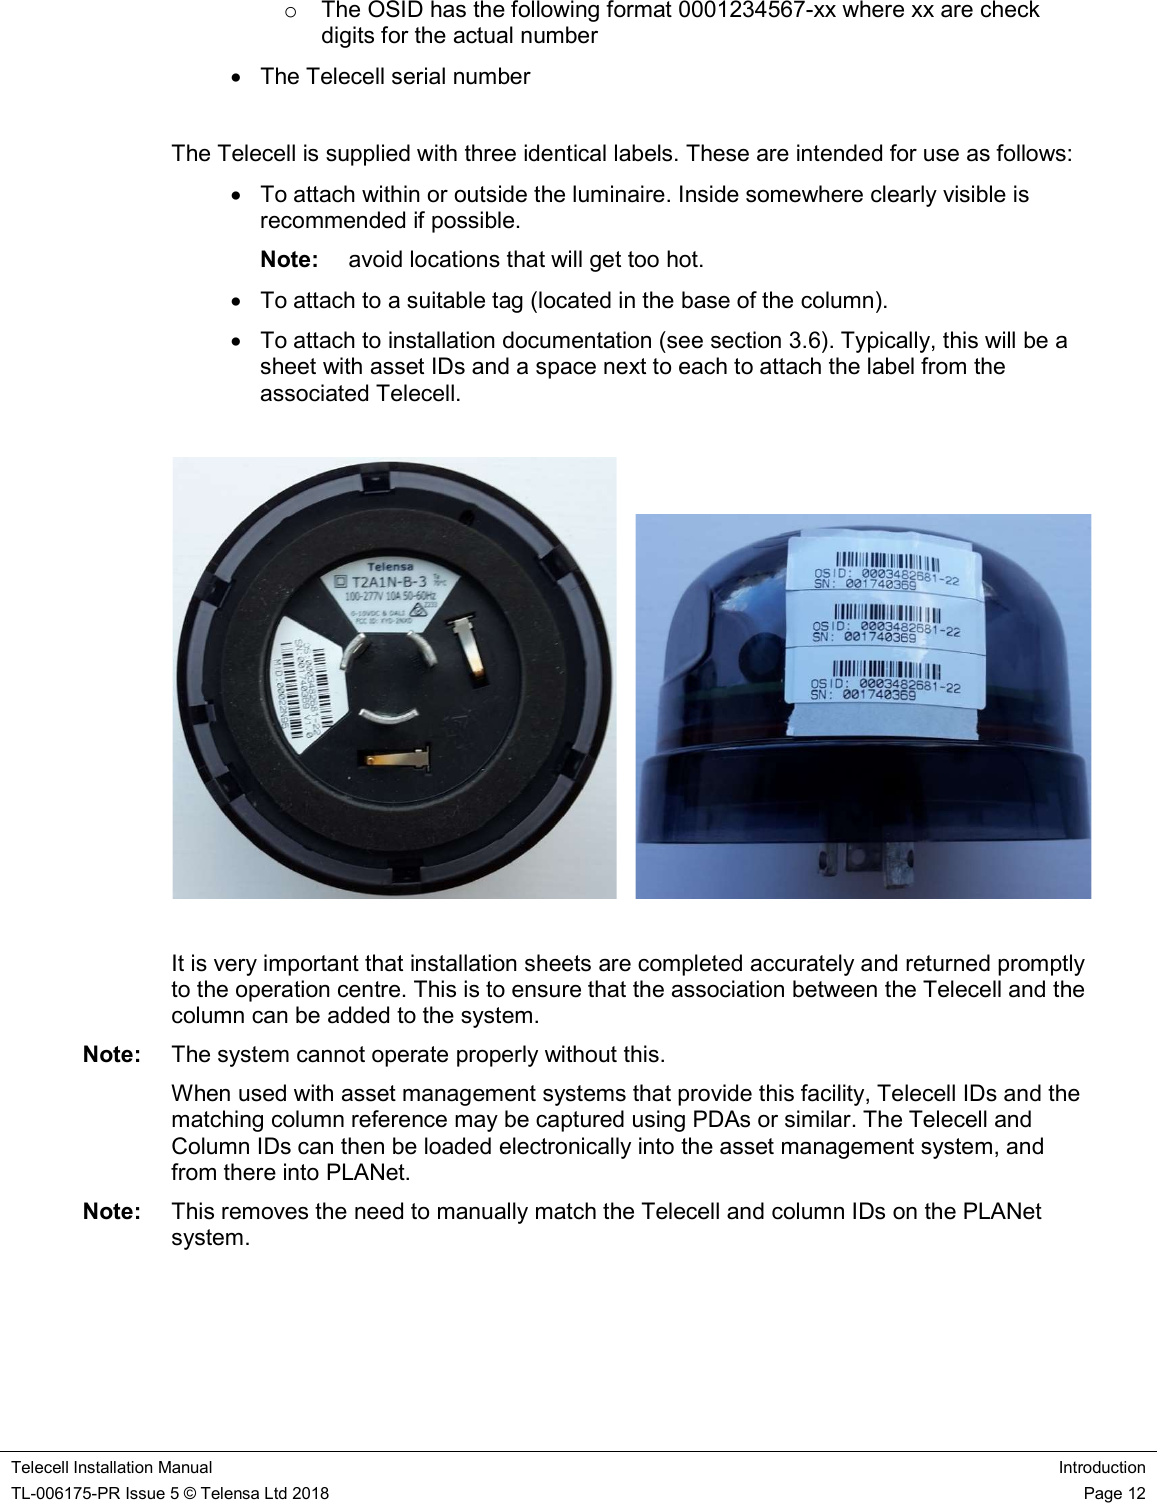    Telecell Installation Manual Introduction TL-006175-PR Issue 5 © Telensa Ltd 2018    Page 12  o  The OSID has the following format 0001234567-xx where xx are check digits for the actual number   The Telecell serial number  The Telecell is supplied with three identical labels. These are intended for use as follows:   To attach within or outside the luminaire. Inside somewhere clearly visible is recommended if possible.  Note:  avoid locations that will get too hot.   To attach to a suitable tag (located in the base of the column).   To attach to installation documentation (see section 3.6). Typically, this will be a sheet with asset IDs and a space next to each to attach the label from the associated Telecell.        It is very important that installation sheets are completed accurately and returned promptly to the operation centre. This is to ensure that the association between the Telecell and the column can be added to the system.  Note:  The system cannot operate properly without this. When used with asset management systems that provide this facility, Telecell IDs and the matching column reference may be captured using PDAs or similar. The Telecell and Column IDs can then be loaded electronically into the asset management system, and from there into PLANet.  Note:  This removes the need to manually match the Telecell and column IDs on the PLANet system.  